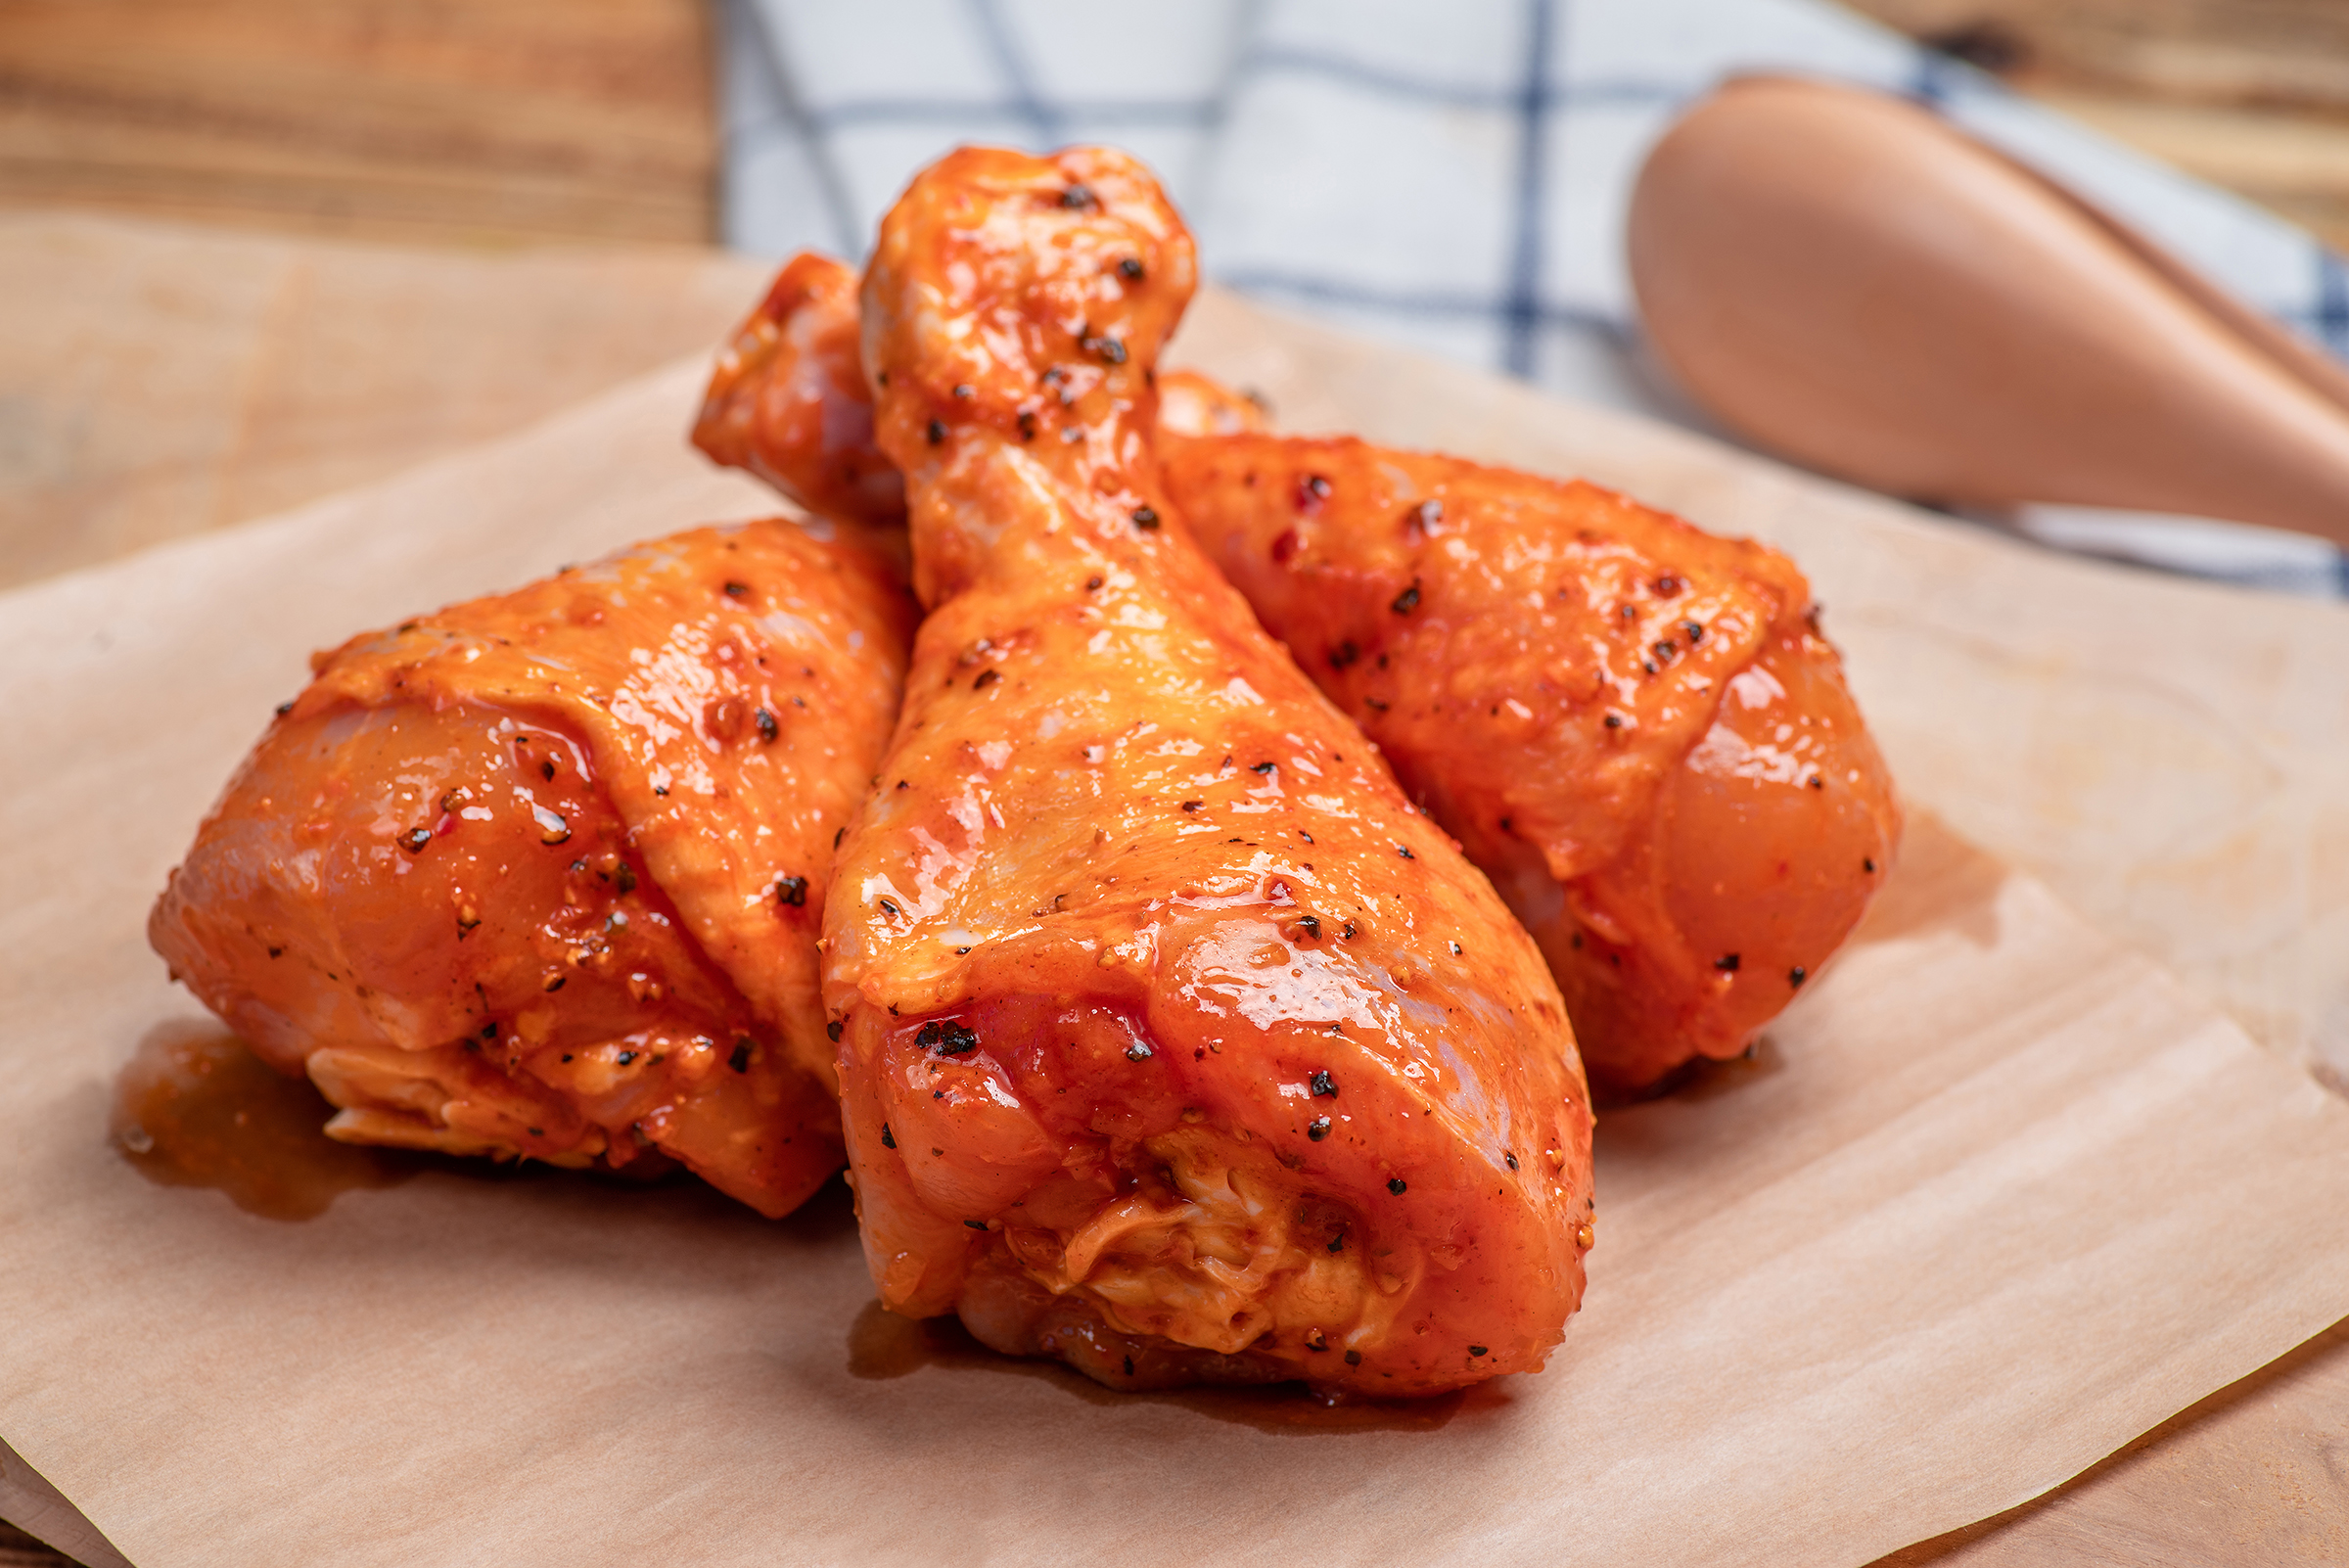 Marinated Chicken Drumsticks - Wholesale Prices | EU Poultry - Poultryeu